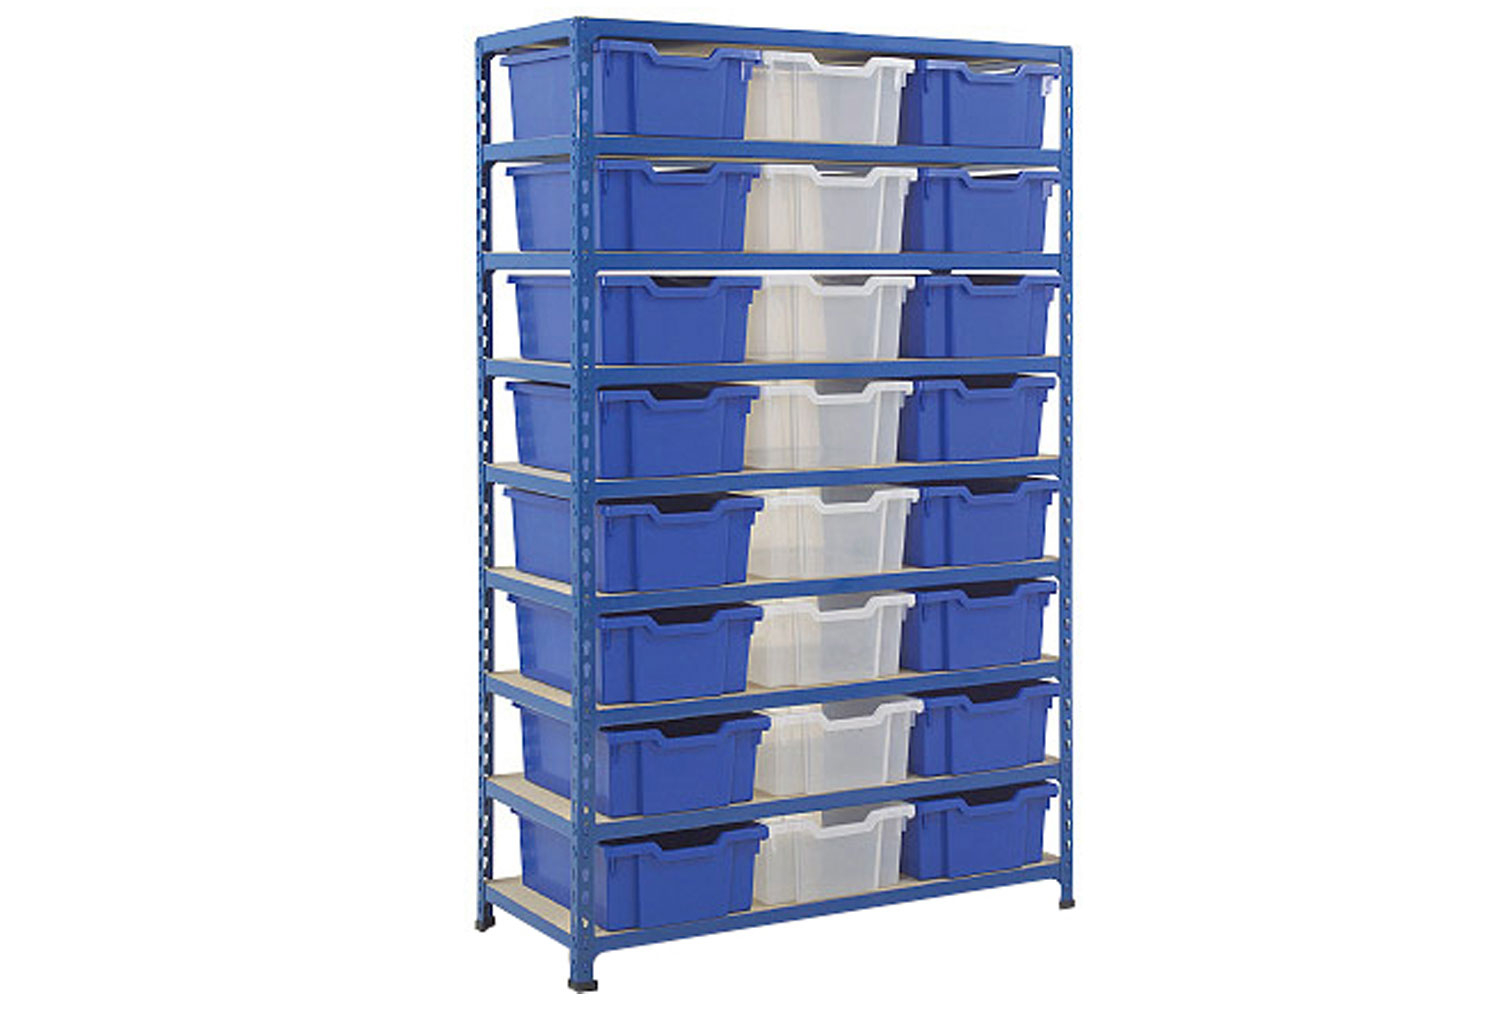 Rapid 2 Shelving Bay With 24 Deep Gratnells Trays, Blue Trays, Blue/Grey, Express Delivery